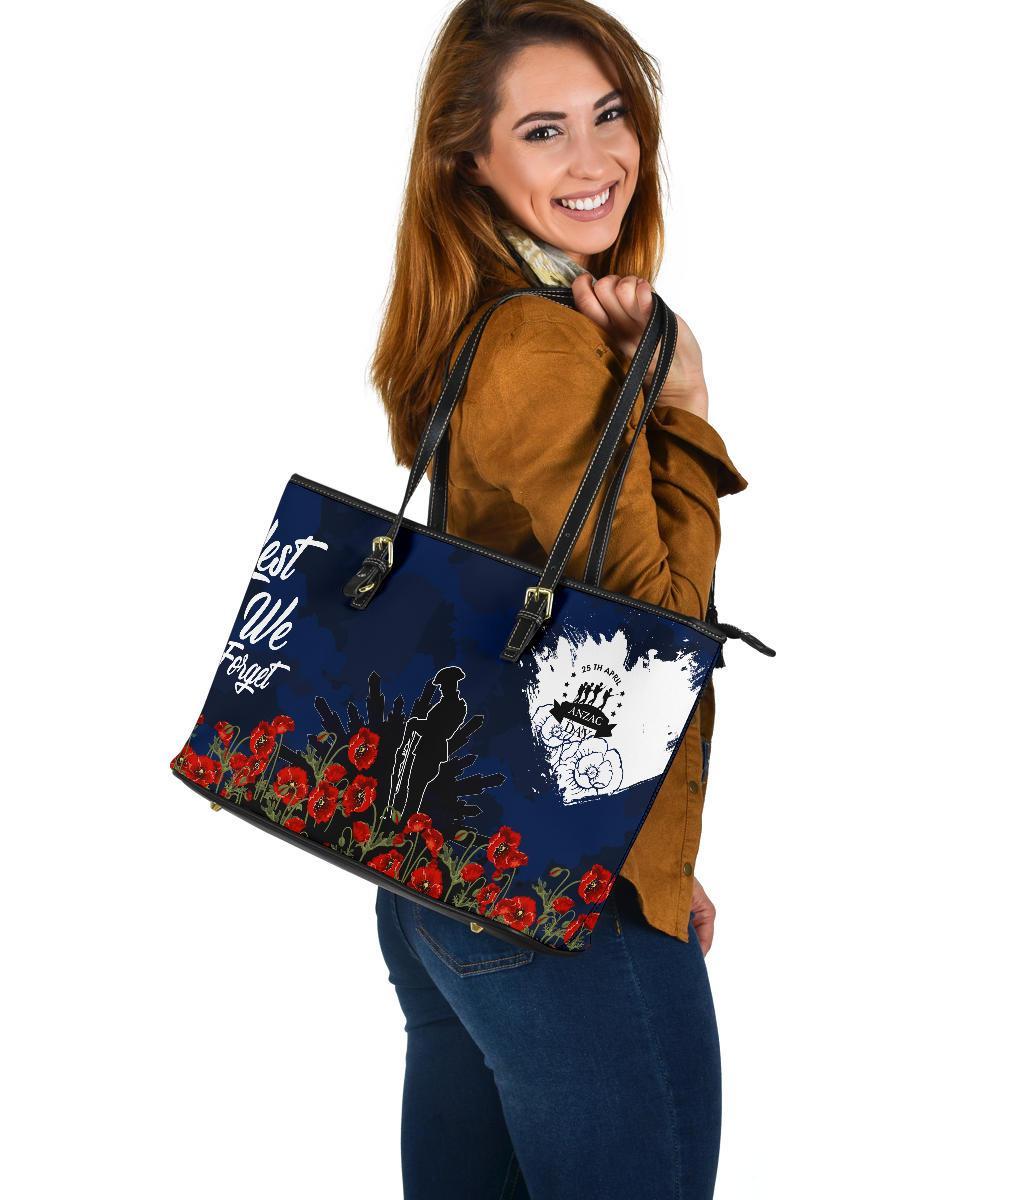 anzac-day-large-leather-tote-bags-australia-anzac-day-2021